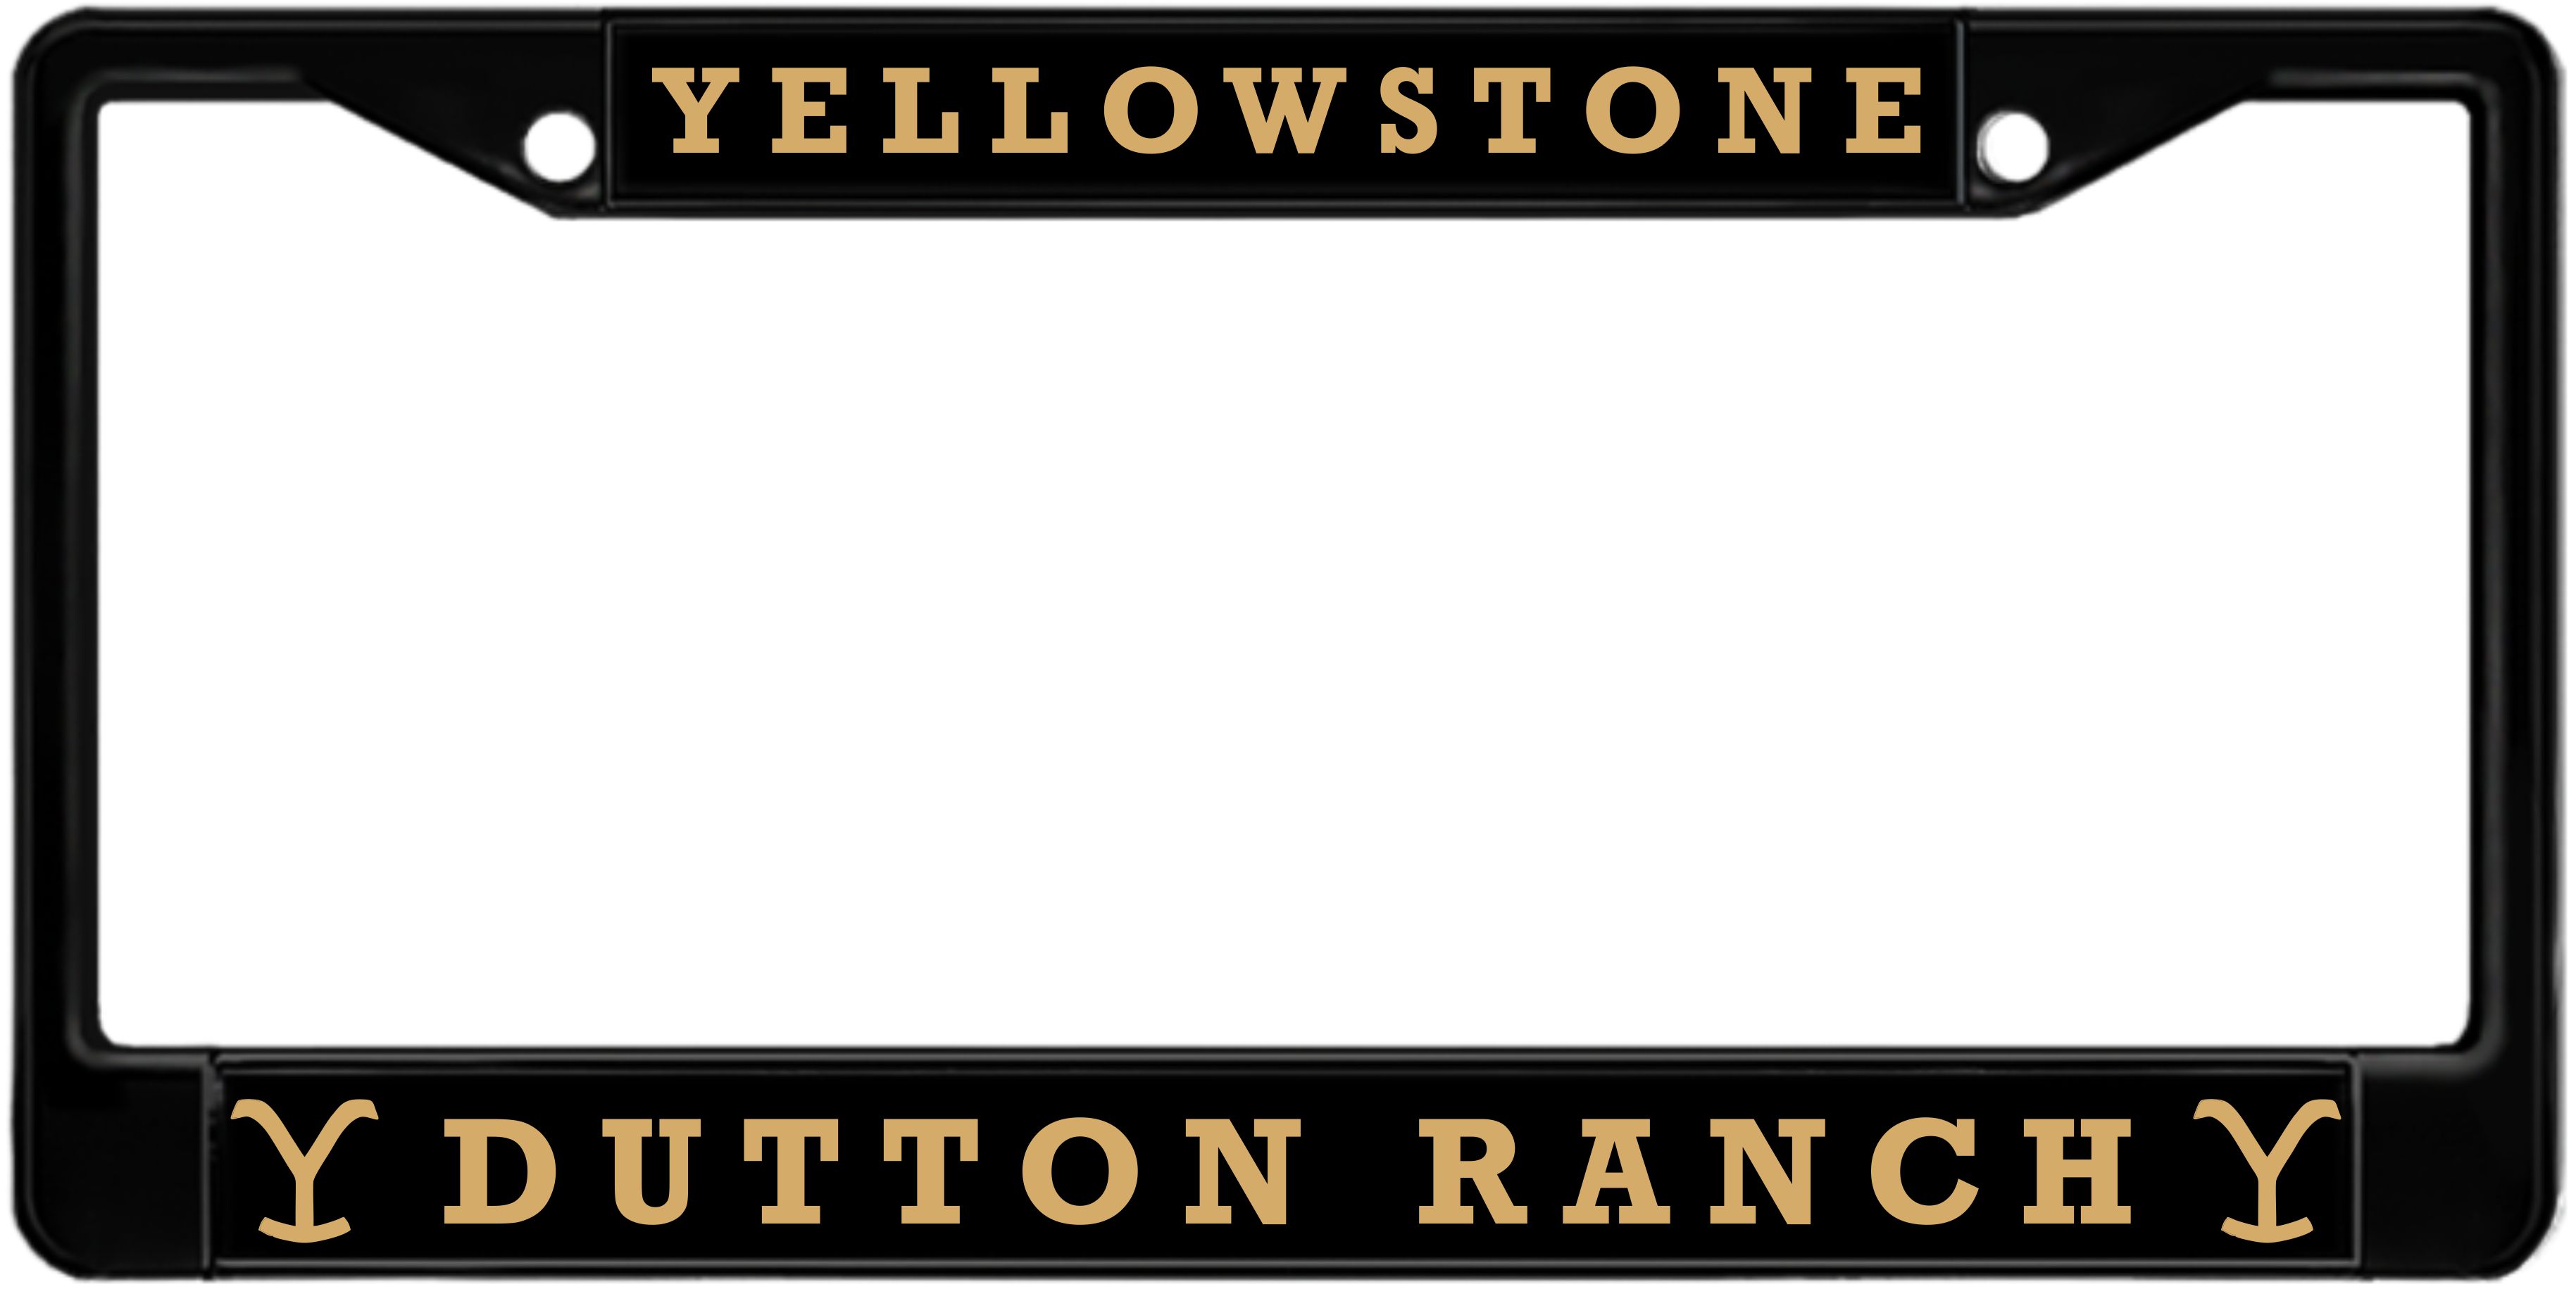 Yellowstone - Custom Metal License Plate Frame with laser engraved acrylic insert strips